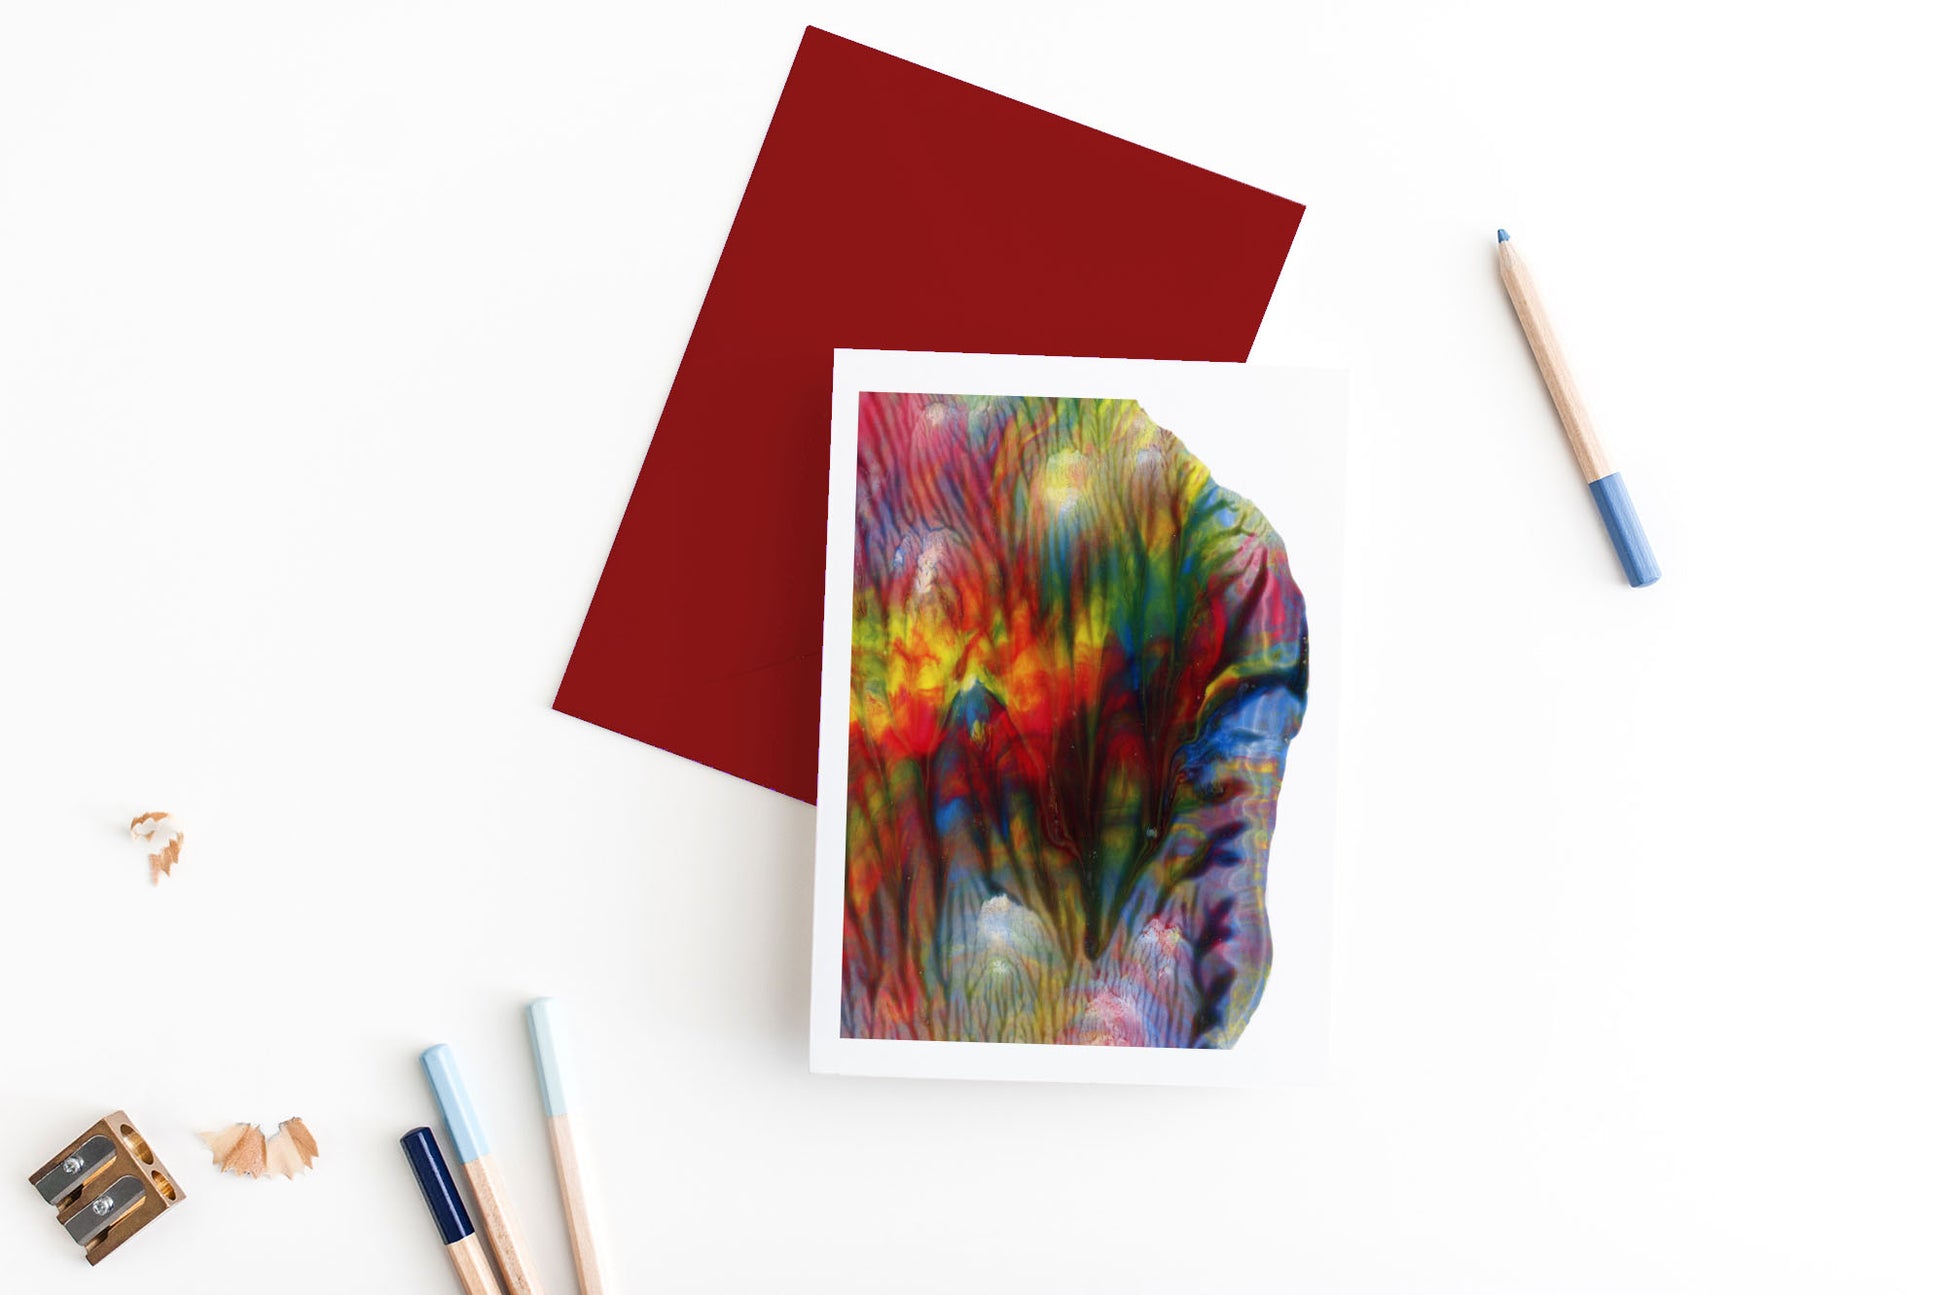 Greeting card showing an abstract painting in rainbow colors created from squishing acrylic paint between pieces of cardboard. It sits on a red envelope with 4 colored pencils, a sharpener and shavings on a white background.